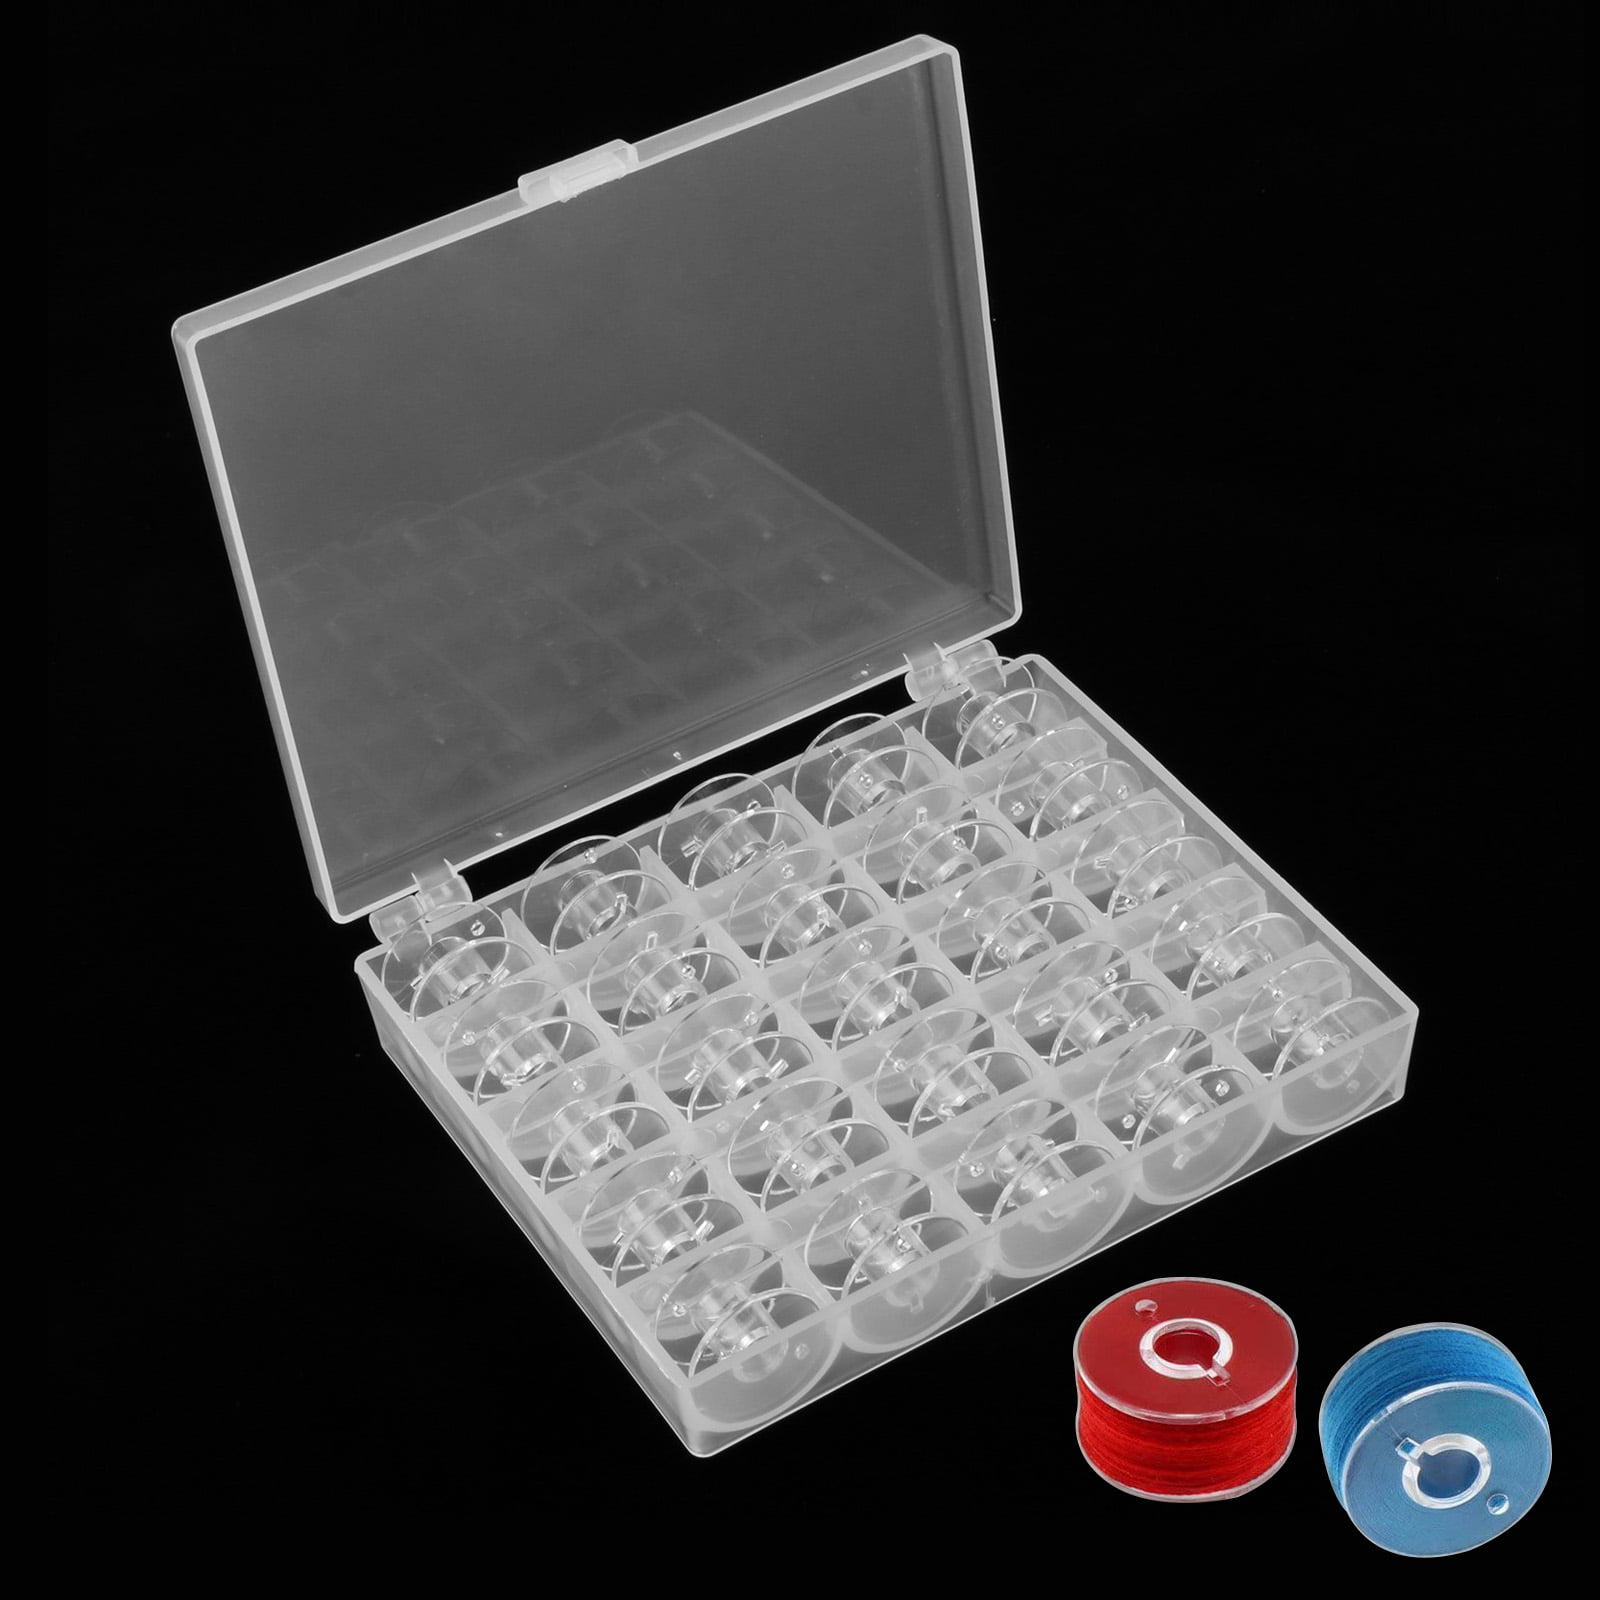 25 Pcs Transparent Plastic Sewing Machine Bobbins with Bobbin Case for Brother Singer Babylock Janome Kenmore